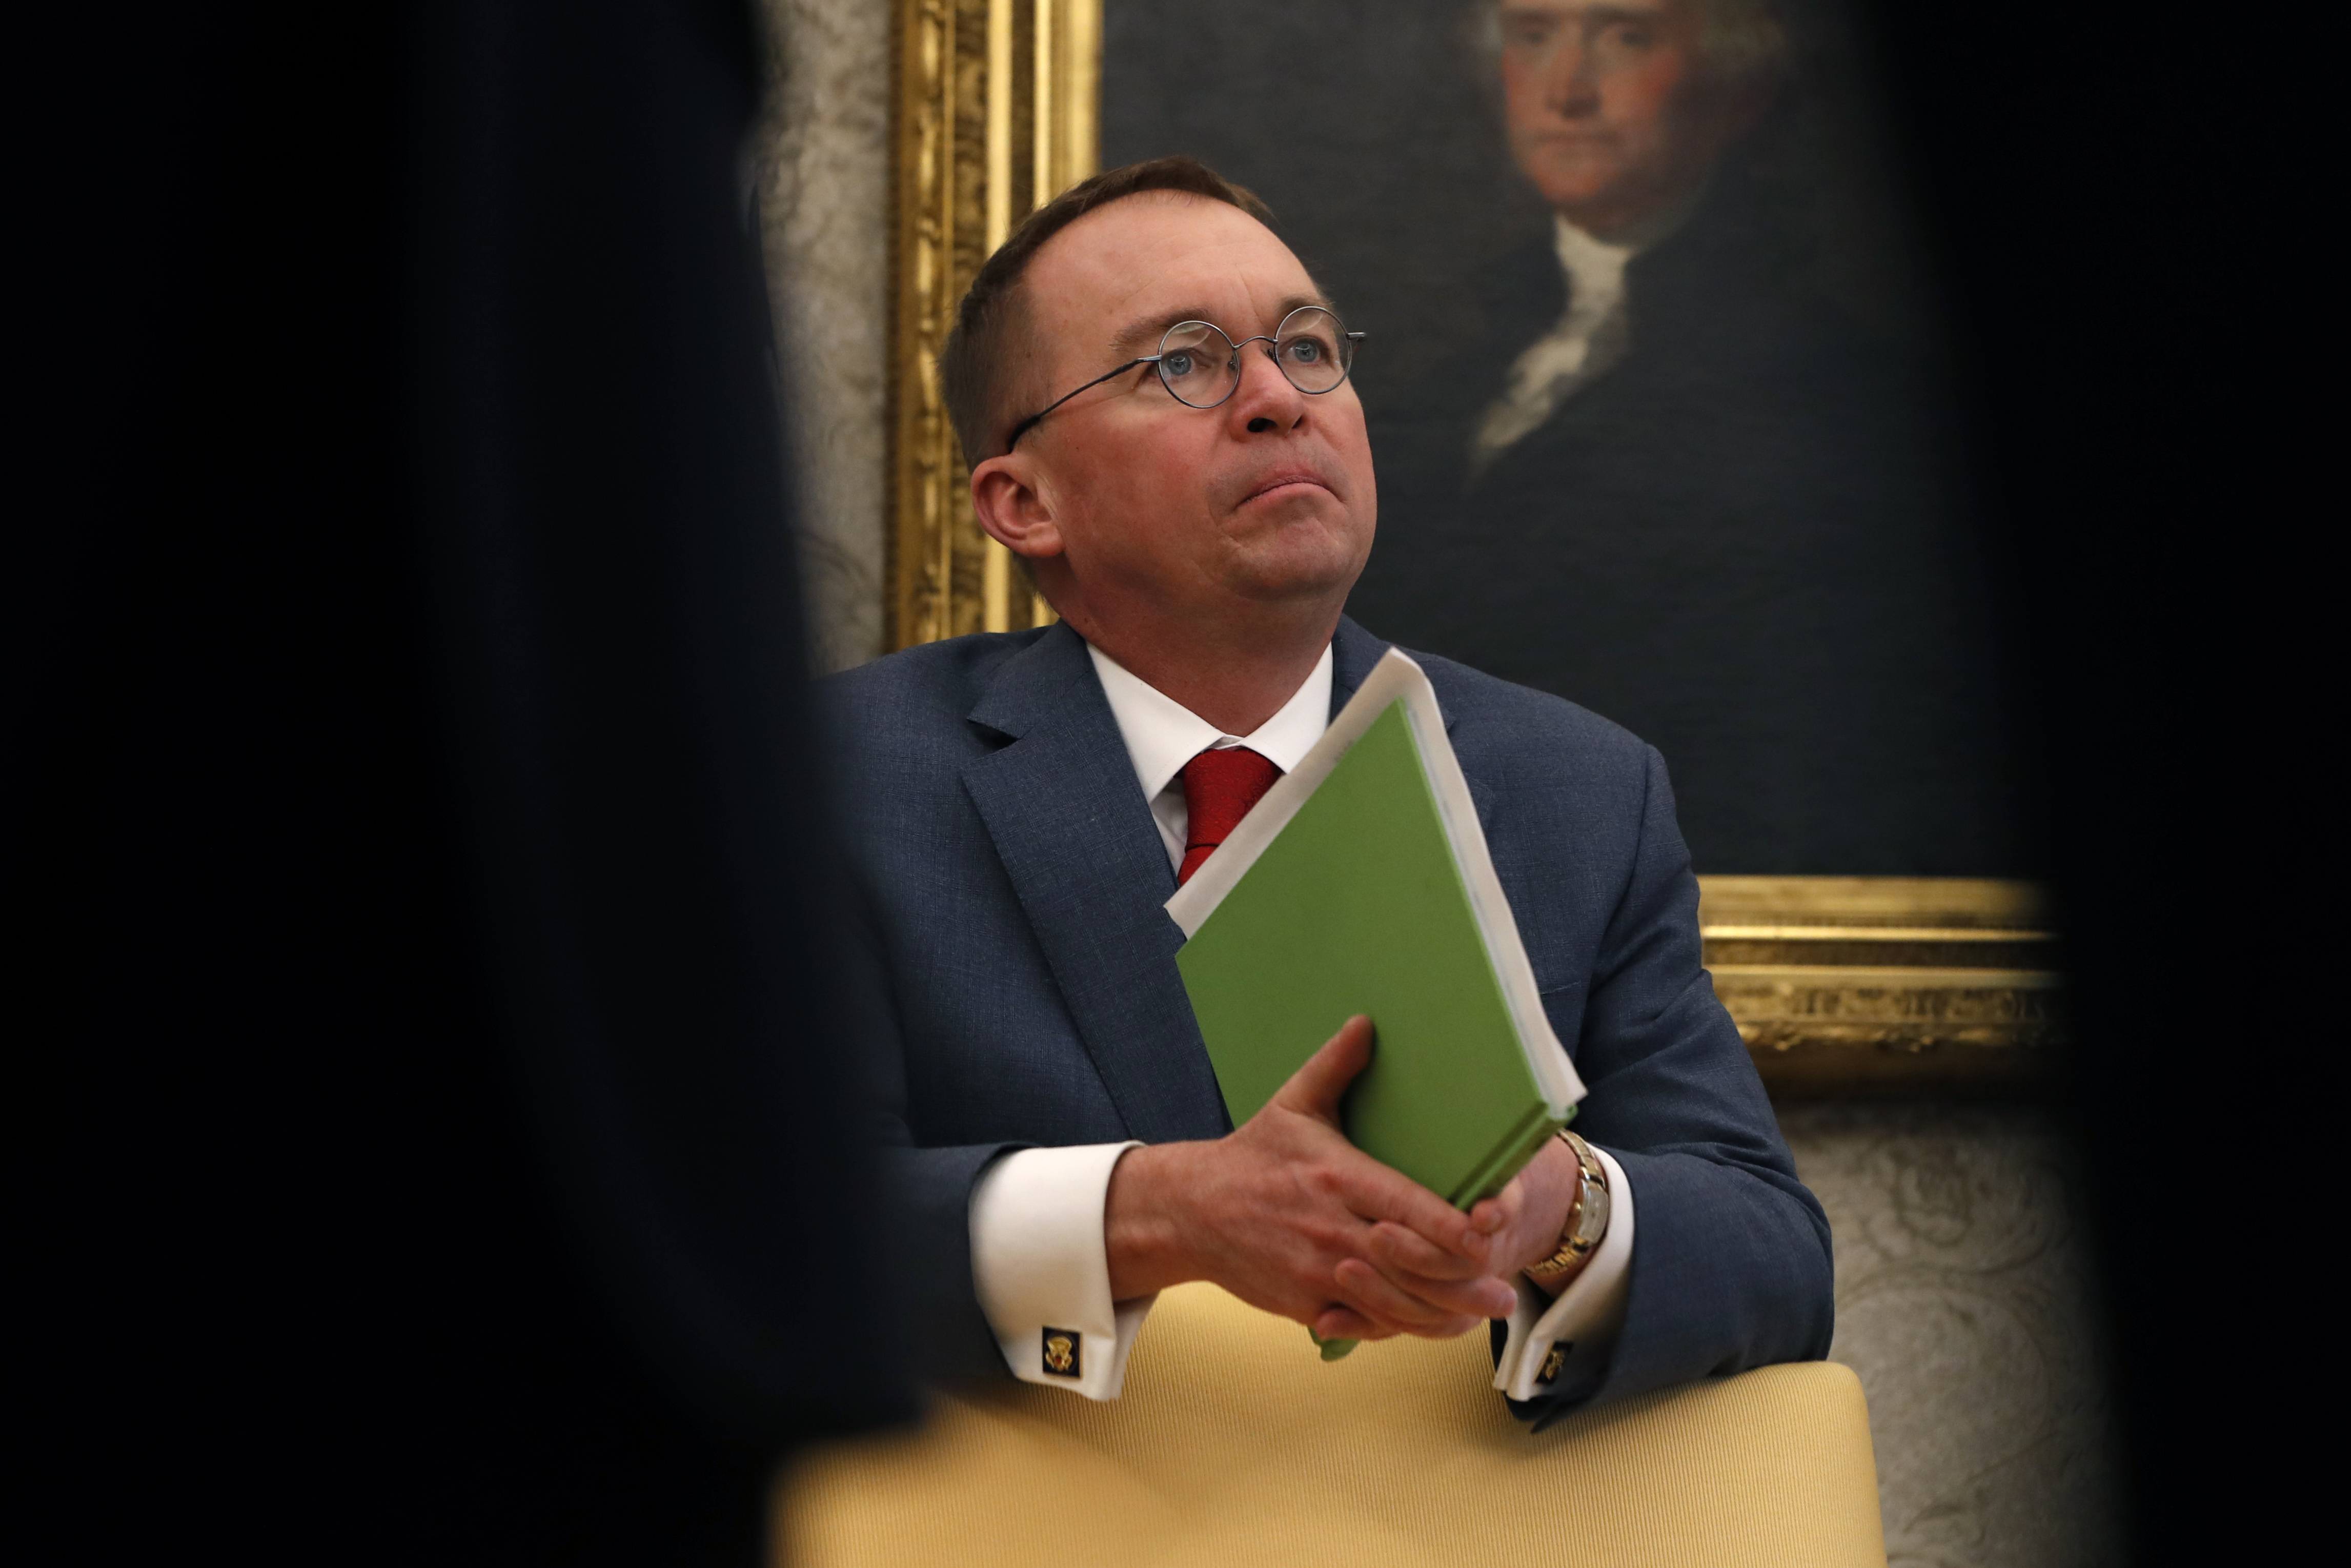 Acting White House chief of staff Mick Mulvaney listens as President Donald Trump speaks during a meeting with American manufacturers in the Oval Office of the White House, Thursday, Jan. 31, 2019, in Washington D.C. (Jacquelyn Martin&mdash;AP)